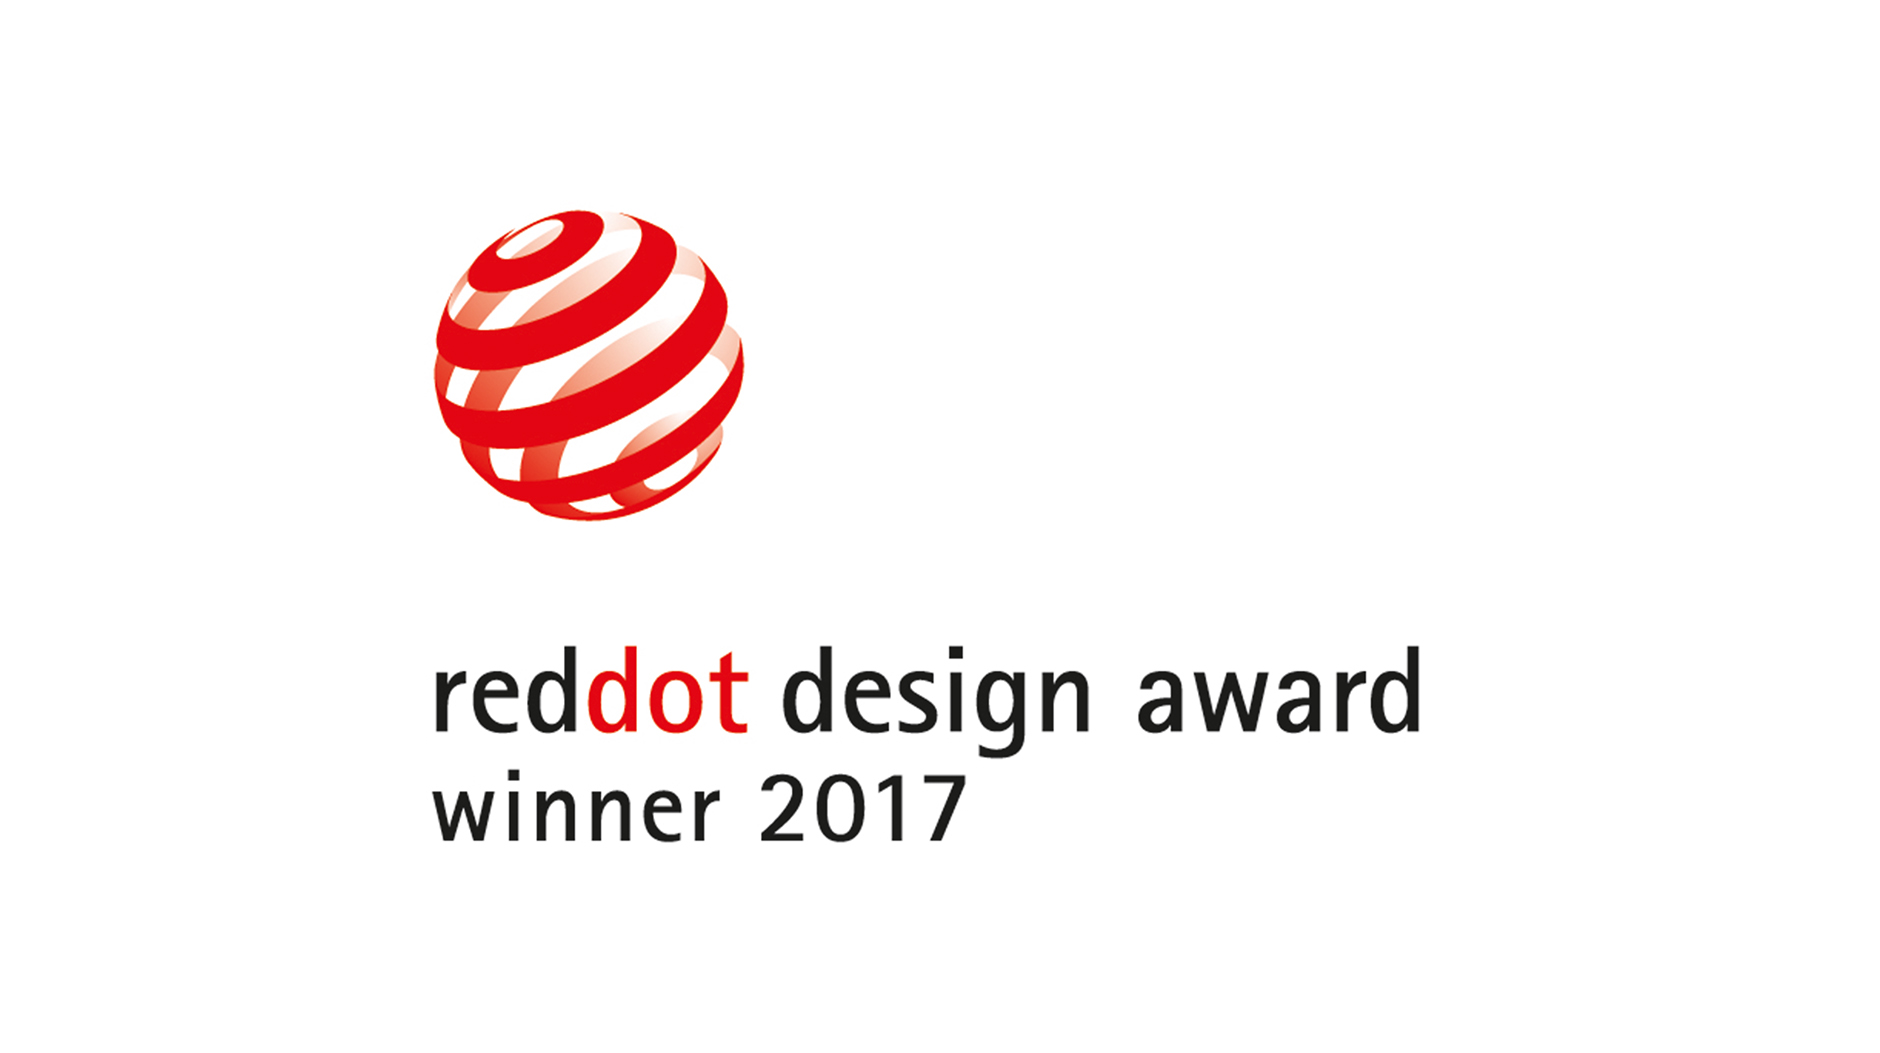 WZWX architecture group / 澤新建築 | 2017 Red Dot Design Award - Interior Architecture And Design Category Award Winner